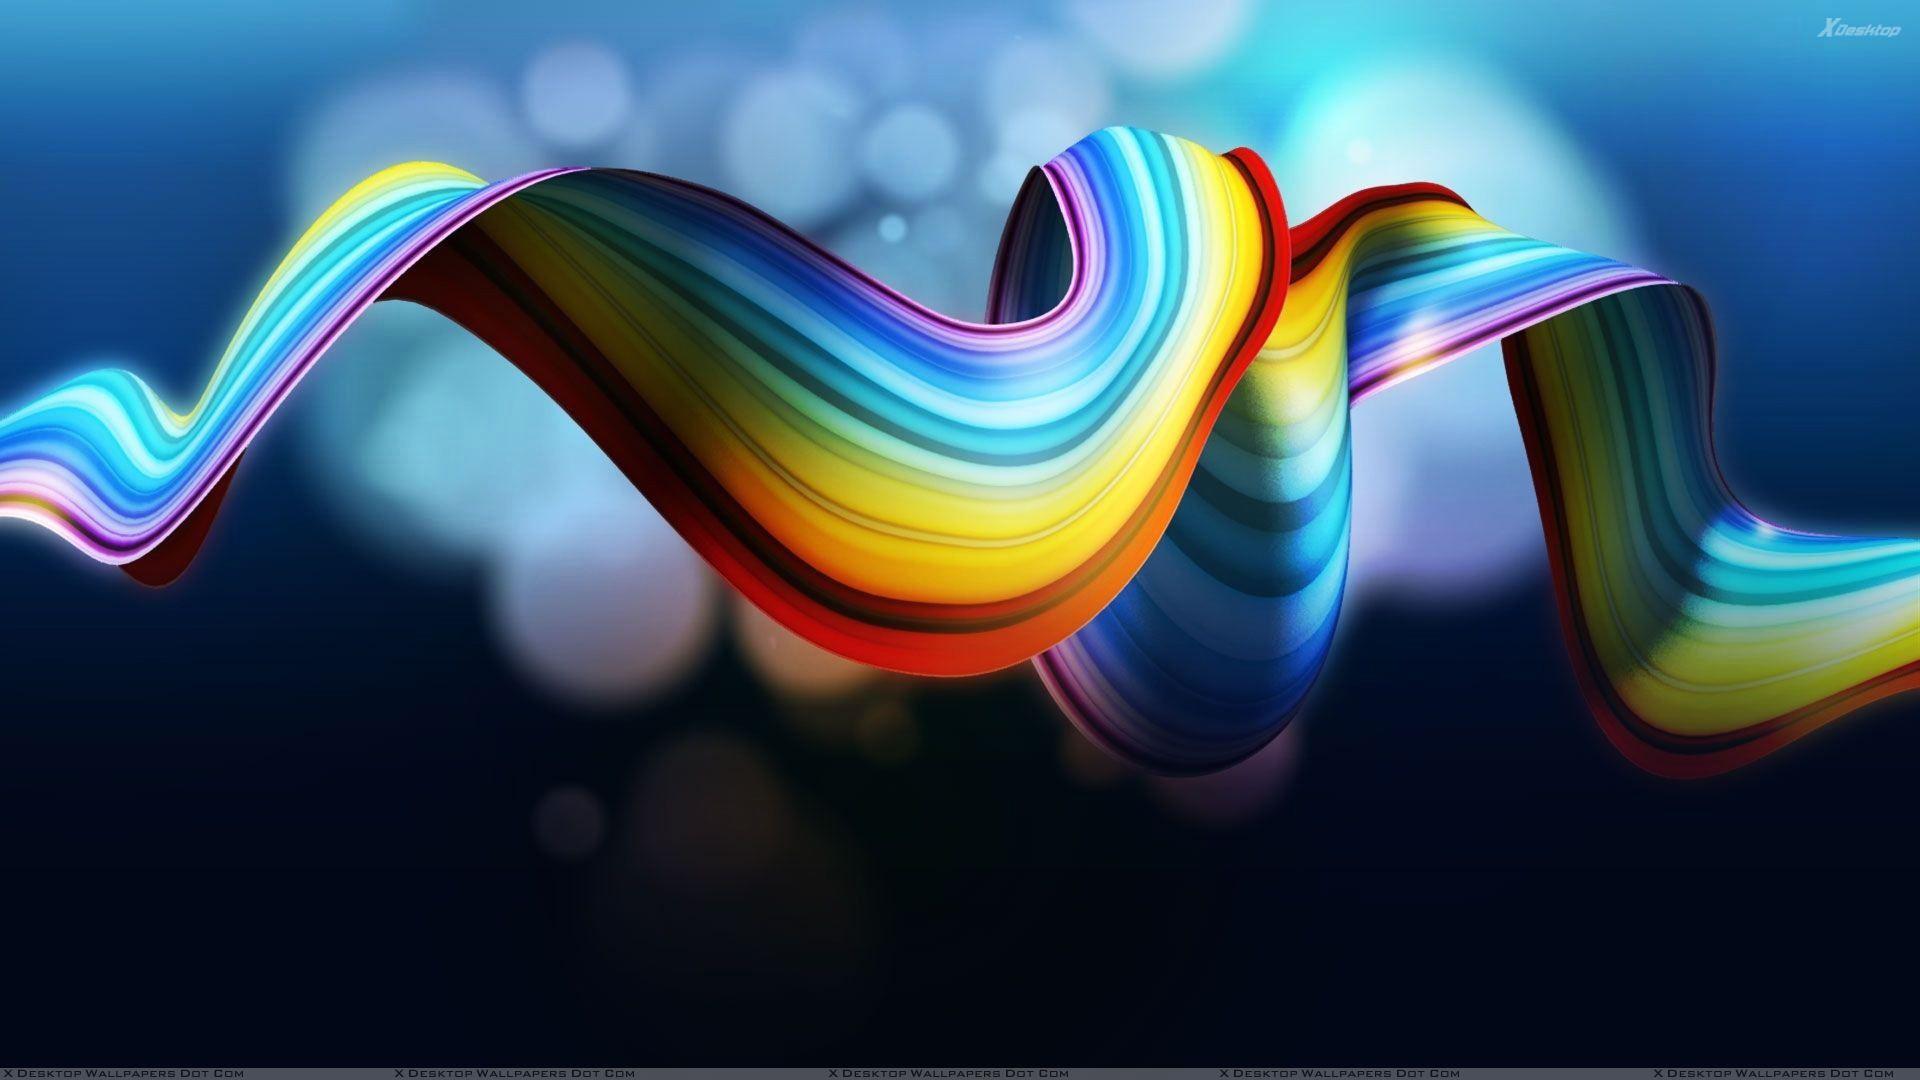 awesome abstract backgrounds designs